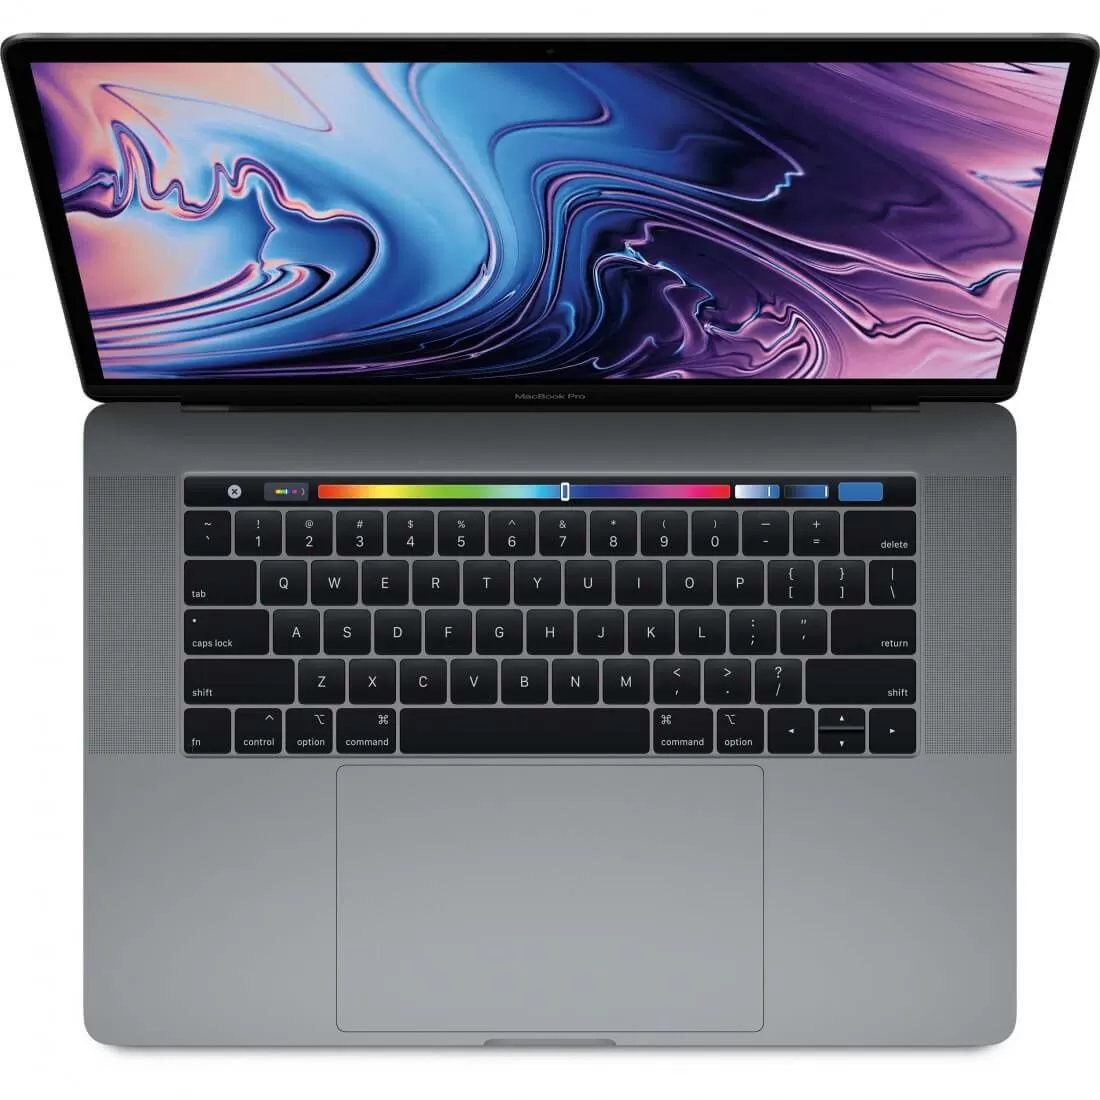 Apple MacBook Pro 15 - Mid 2018 Reviews, Pros and Cons | TechSpot